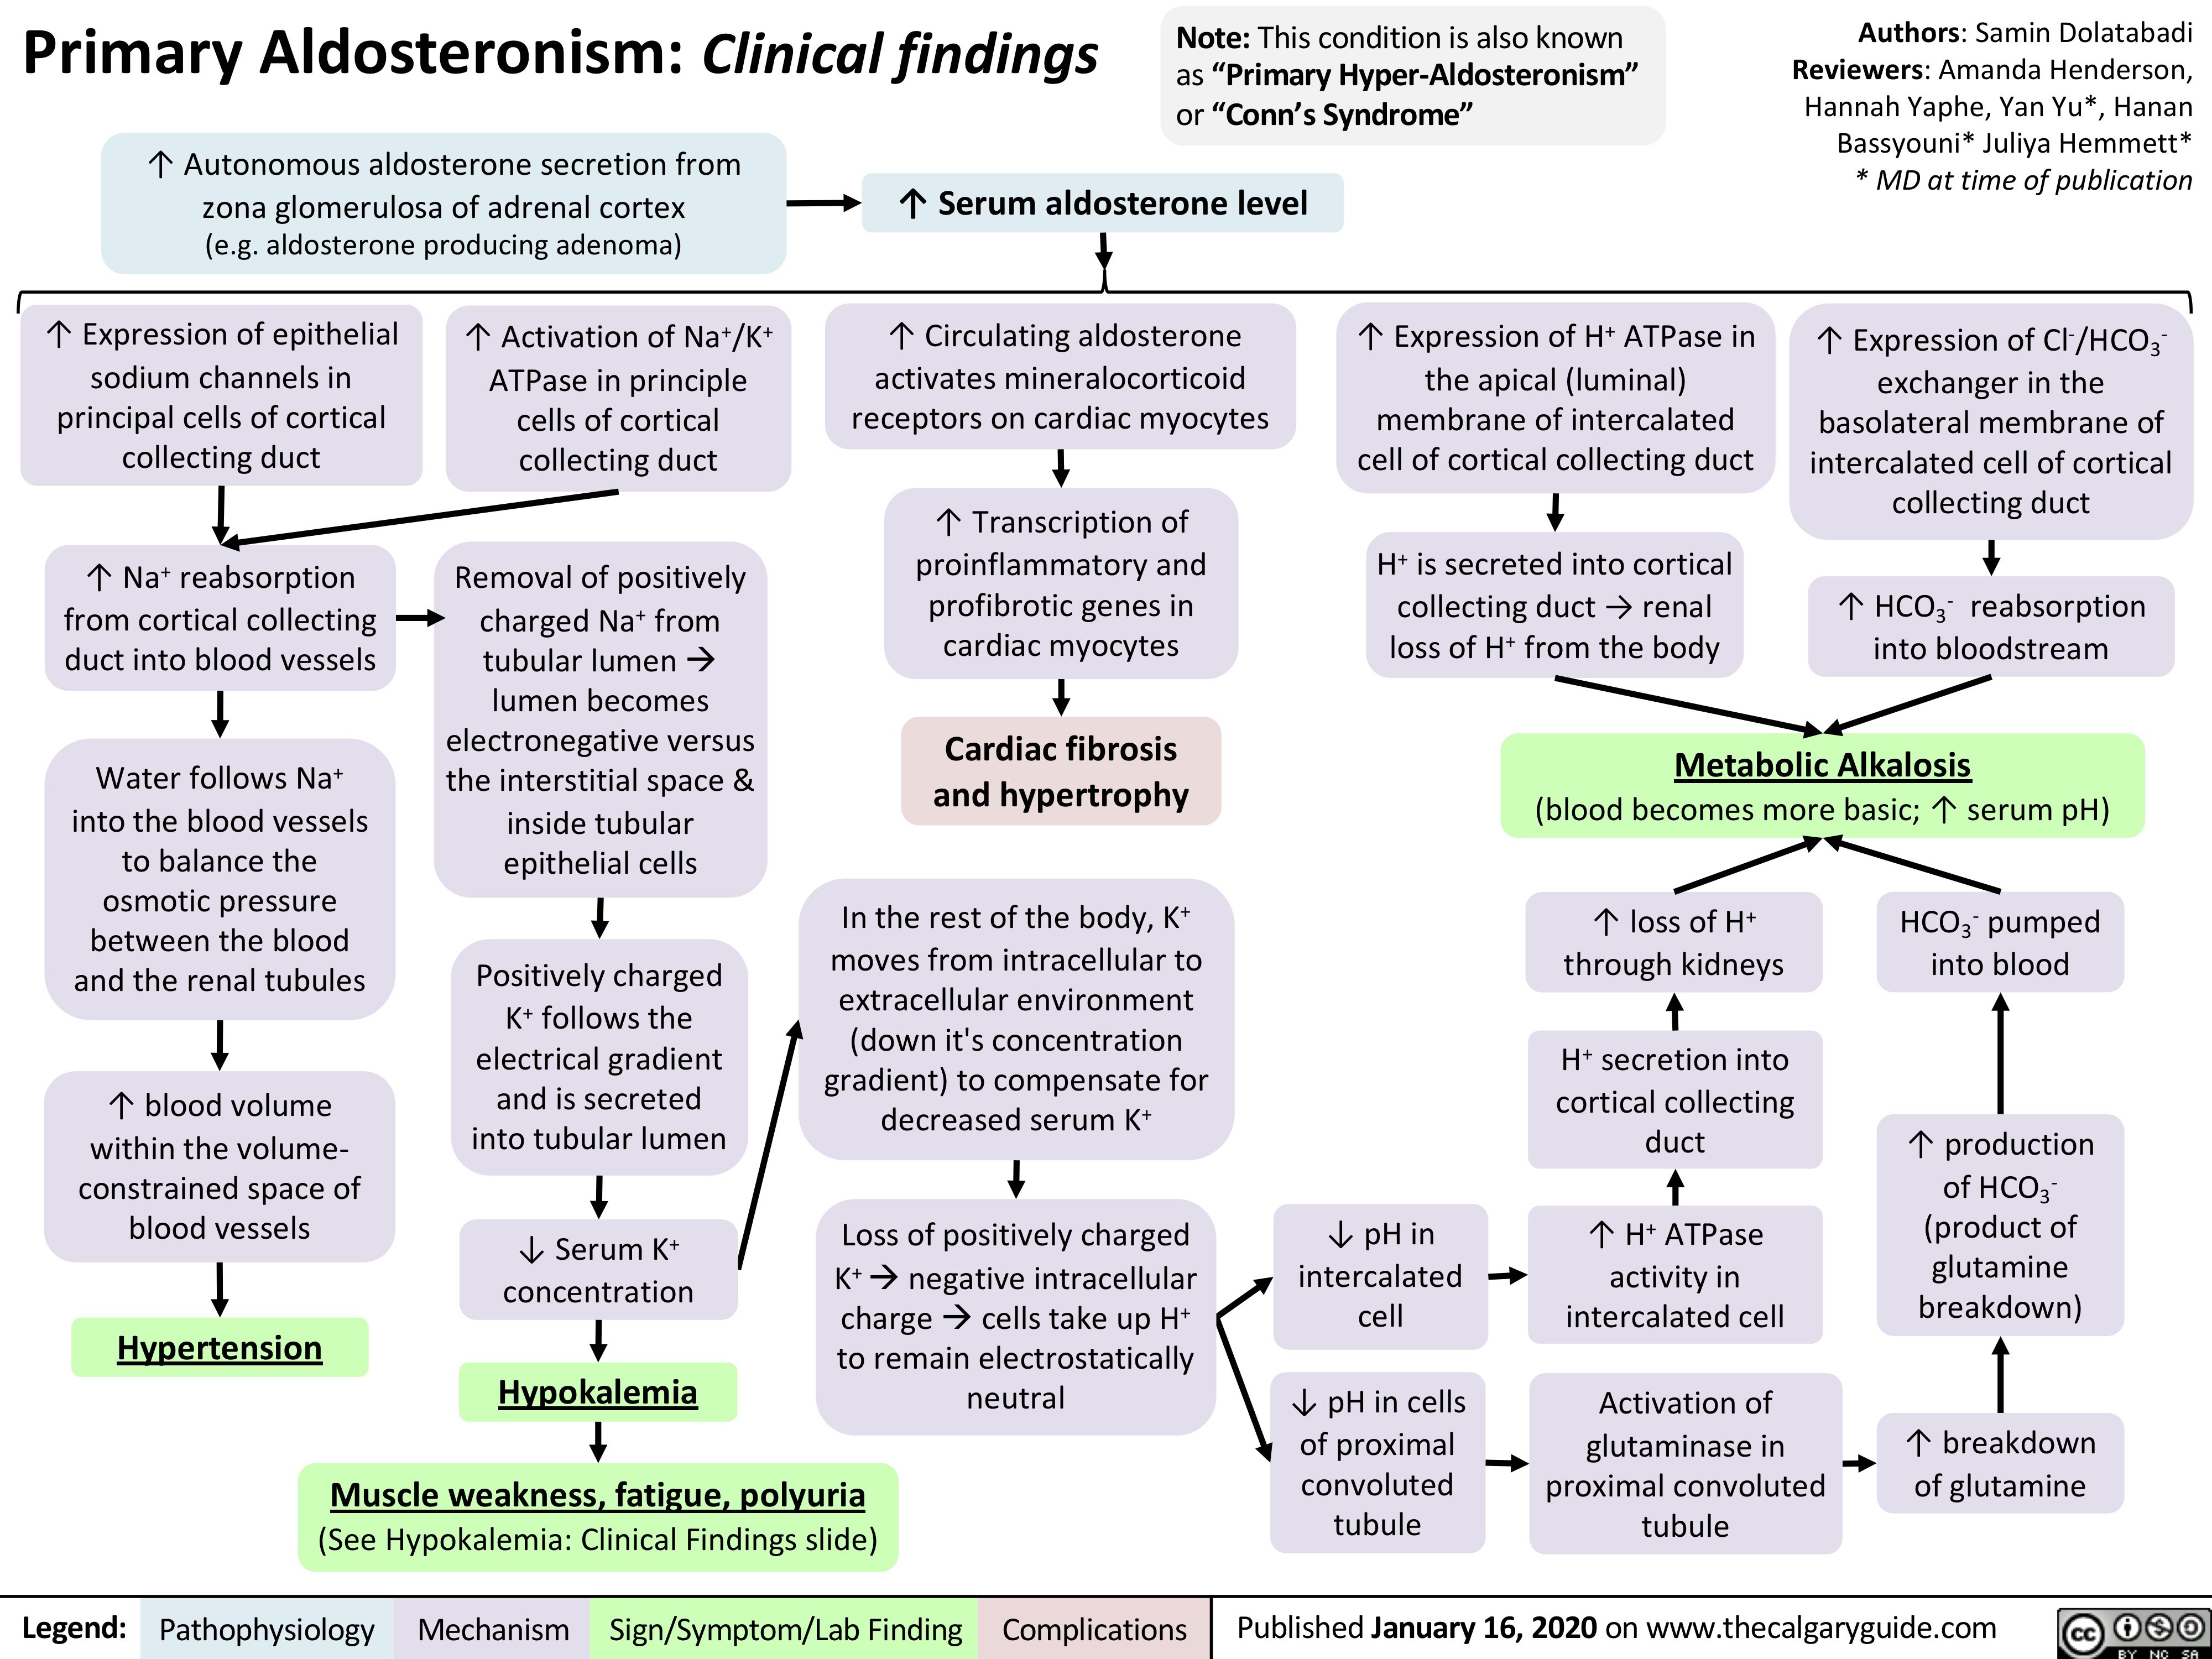  Primary Aldosteronism: Clinical findings
Note: This condition is also known as “Primary Hyper-Aldosteronism” or “Conn’s Syndrome”
Authors: Samin Dolatabadi Reviewers: Amanda Henderson, Hannah Yaphe, Yan Yu*, Hanan Bassyouni* Juliya Hemmett* * MD at time of publication
↑ Expression of Cl-/HCO3- exchanger in the basolateral membrane of intercalated cell of cortical collecting duct
↑ HCO3- reabsorption into bloodstream
 ↑ Autonomous aldosterone secretion from zona glomerulosa of adrenal cortex (e.g. aldosterone producing adenoma)
↑ Serum aldosterone level
↑ Circulating aldosterone activates mineralocorticoid receptors on cardiac myocytes
↑ Transcription of proinflammatory and profibrotic genes in cardiac myocytes
Cardiac fibrosis and hypertrophy
In the rest of the body, K+ moves from intracellular to extracellular environment (down it's concentration gradient) to compensate for decreased serum K+
Loss of positively charged K+ànegative intracellular chargeàcells take up H+ to remain electrostatically neutral
         ↑ Expression of epithelial sodium channels in
principal cells of cortical collecting duct
↑ Na+ reabsorption from cortical collecting duct into blood vessels
+ Water follows Na
into the blood vessels to balance the osmotic pressure between the blood and the renal tubules
↑ blood volume within the volume-
constrained space of blood vessels
↑ Activation of Na+/K+ ATPase in principle cells of cortical collecting duct
Removal of positively charged Na+ from tubular lumenà lumen becomes electronegative versus the interstitial space & inside tubular epithelial cells
Positively charged K+ follows the electrical gradient and is secreted into tubular lumen
↓ Serum K+ concentration
↑ Expression of H+ ATPase in the apical (luminal)
membrane of intercalated cell of cortical collecting duct
H+ is secreted into cortical collecting duct → renal loss of H+ from the body
                 Metabolic Alkalosis
(blood becomes more basic; ↑ serum pH)
                            Hypertension
Muscle weakness, fatigue, polyuria
↓ pH in intercalated cell
↓ pH in cells of proximal convoluted tubule
↑ loss of H+ through kidneys
H+ secretion into cortical collecting duct
↑ H+ ATPase activity in intercalated cell
Activation of glutaminase in proximal convoluted tubule
HCO3- pumped into blood
↑ production of HCO3- (product of glutamine breakdown)
↑ breakdown of glutamine
   Hypokalemia
         (See Hypokalemia: Clinical Findings slide)
 Legend:
 Pathophysiology
 Mechanism
Sign/Symptom/Lab Finding
  Complications
Published January 16, 2020 on www.thecalgaryguide.com
   